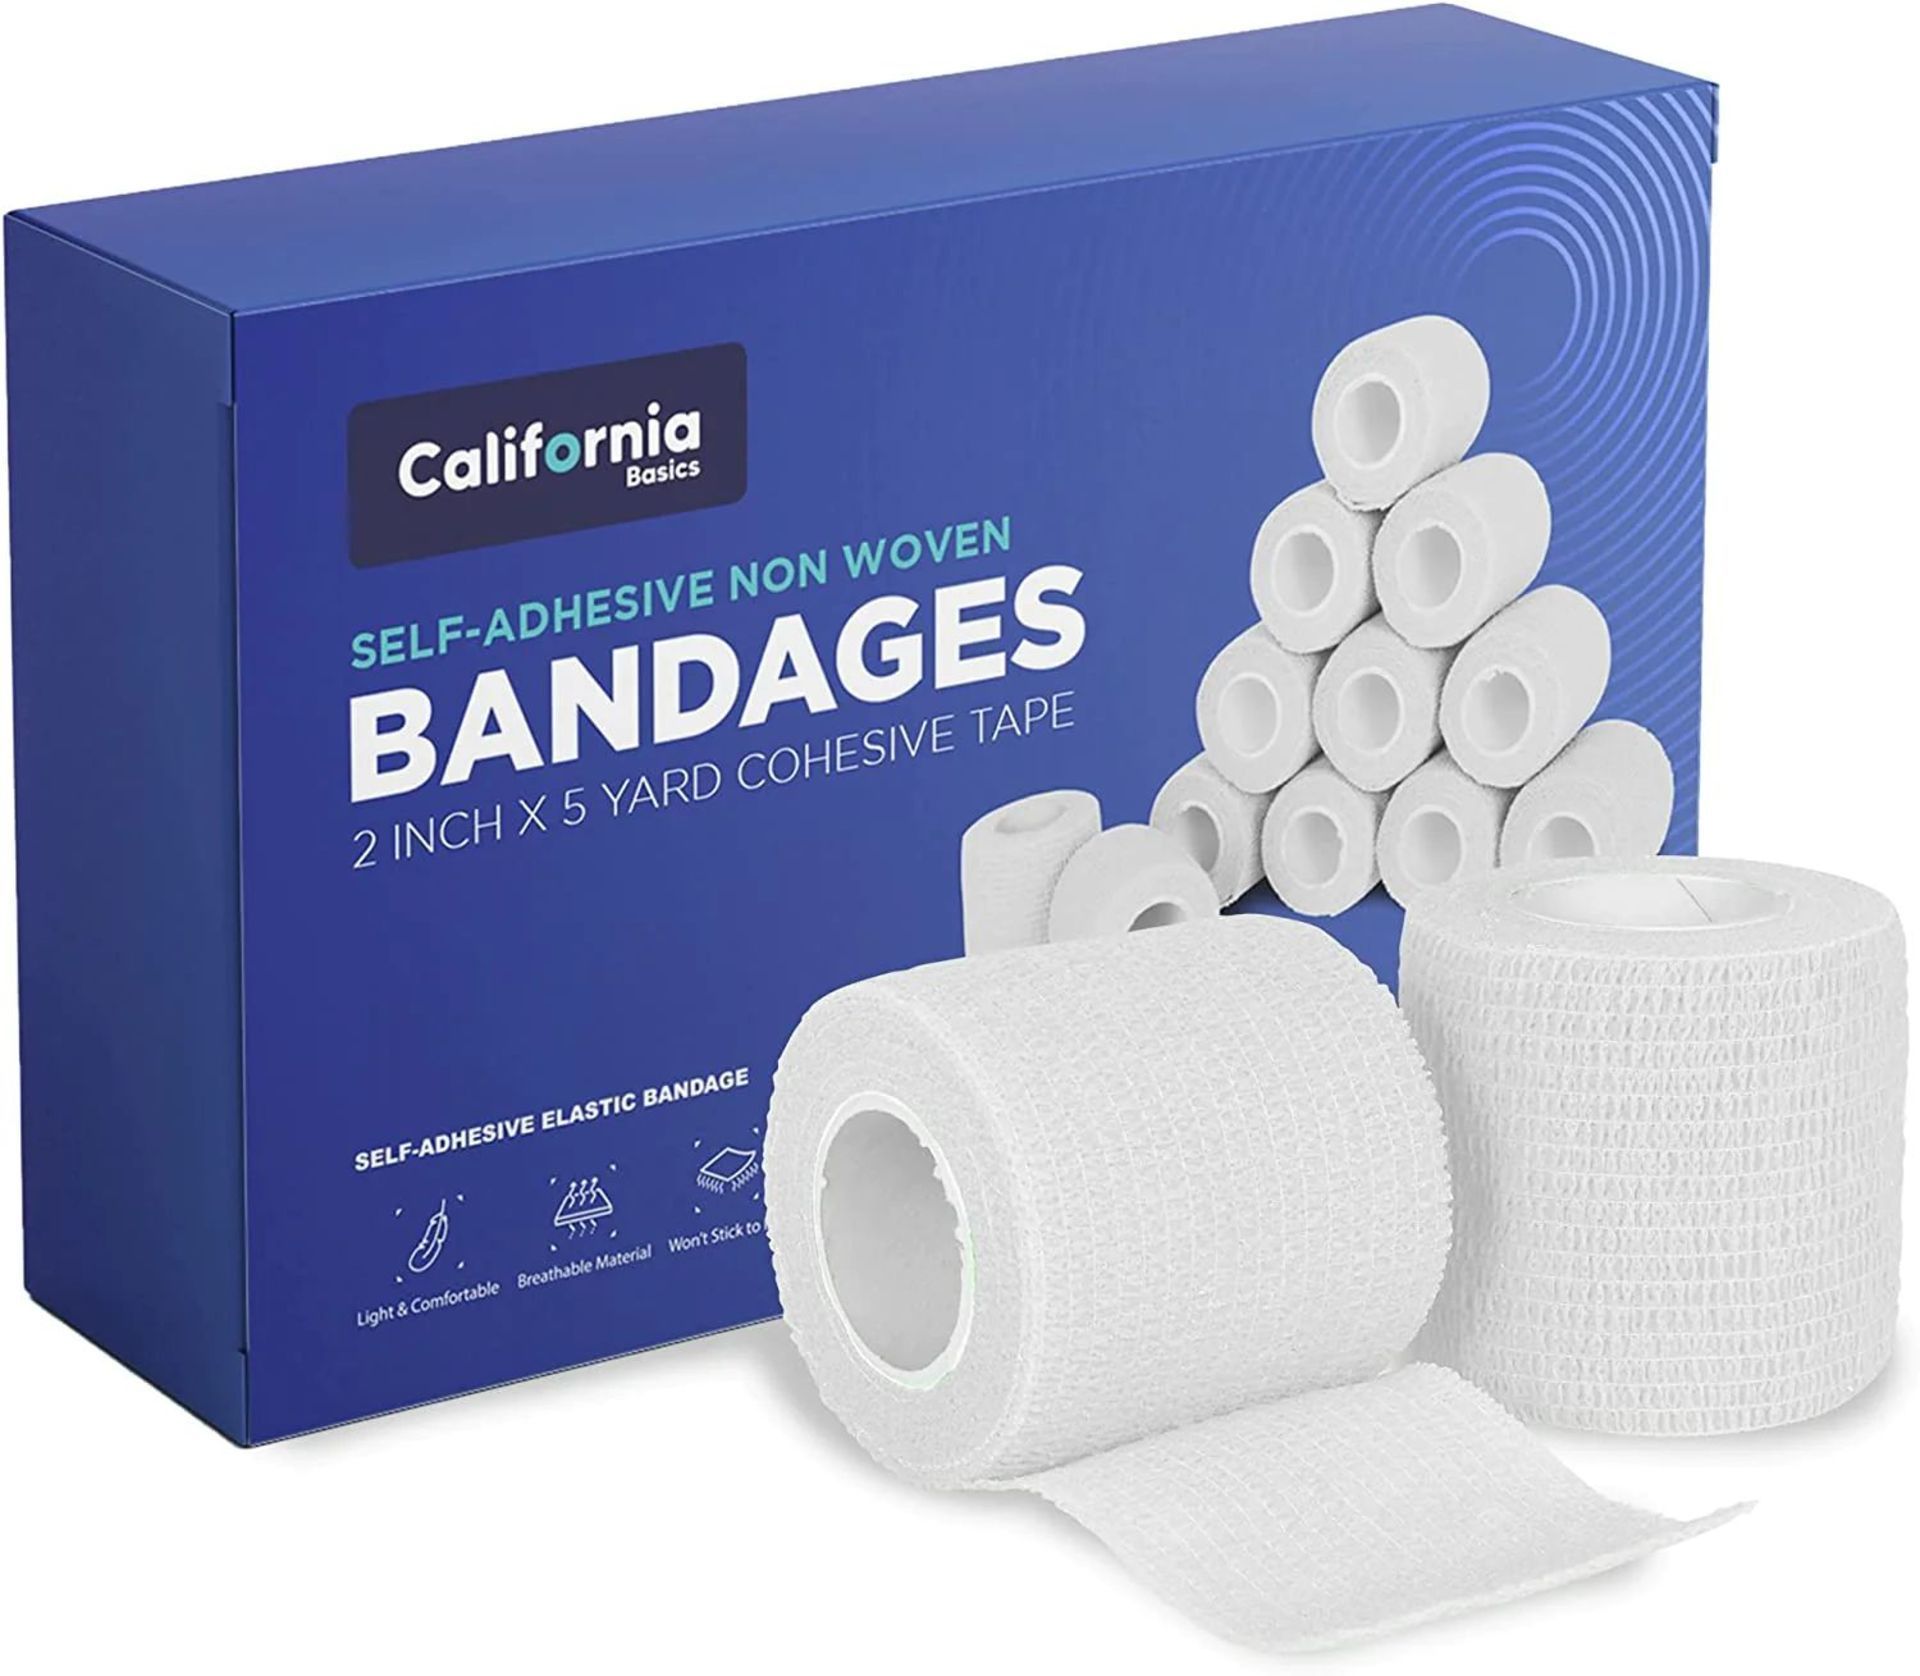 25 X BRAND NEW PACKS OF 24 SELF ADHESIVE NON WOVEN BANDAGES (COLOURS MAY VARY) R19-5